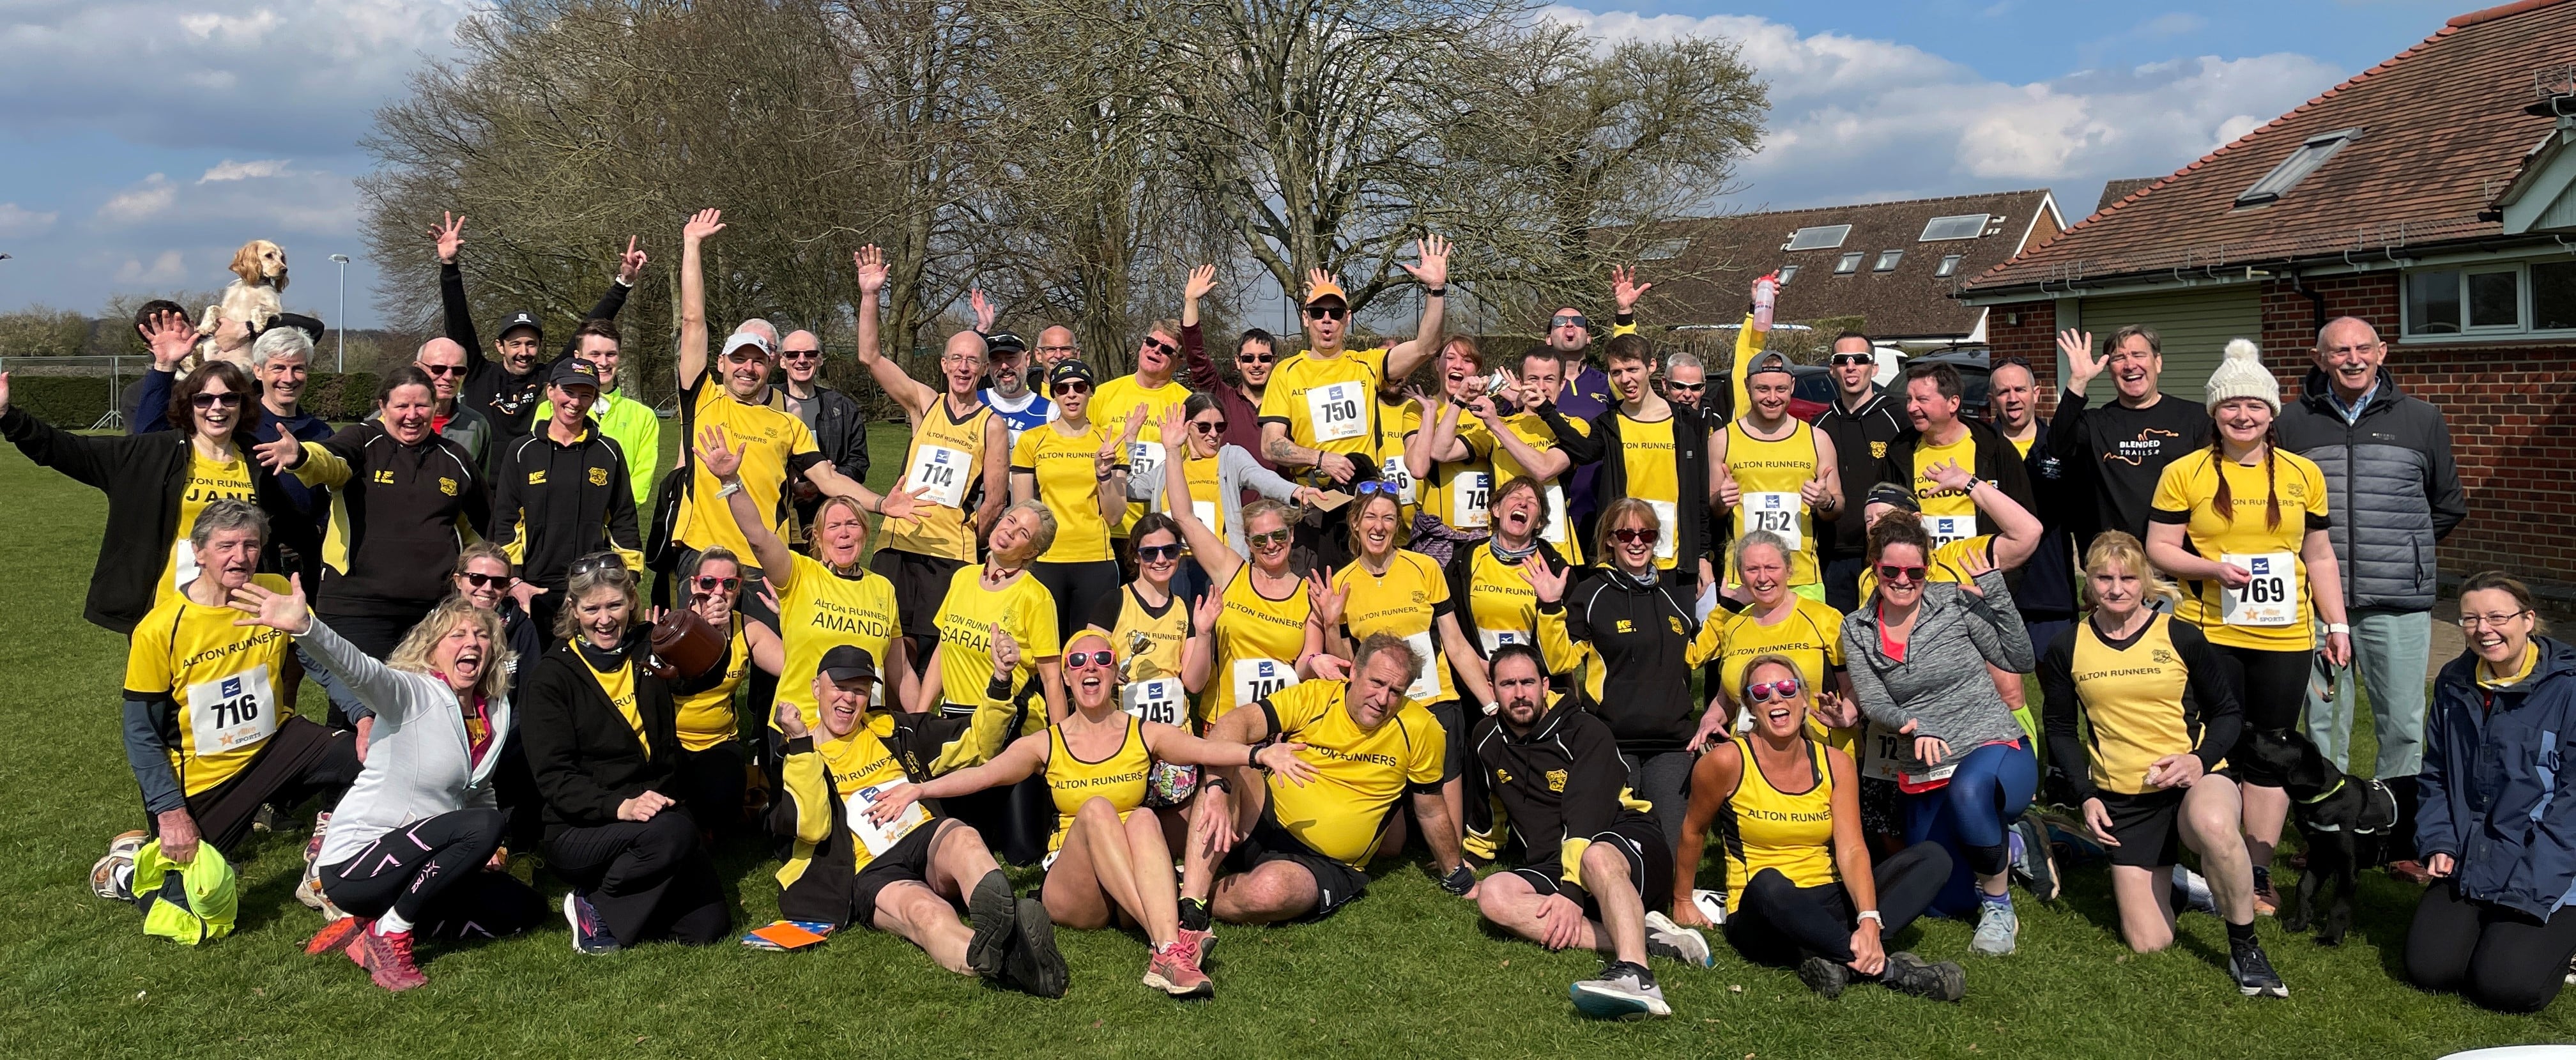 Alton Runners recreates Ropley 10k for Club Charity Event